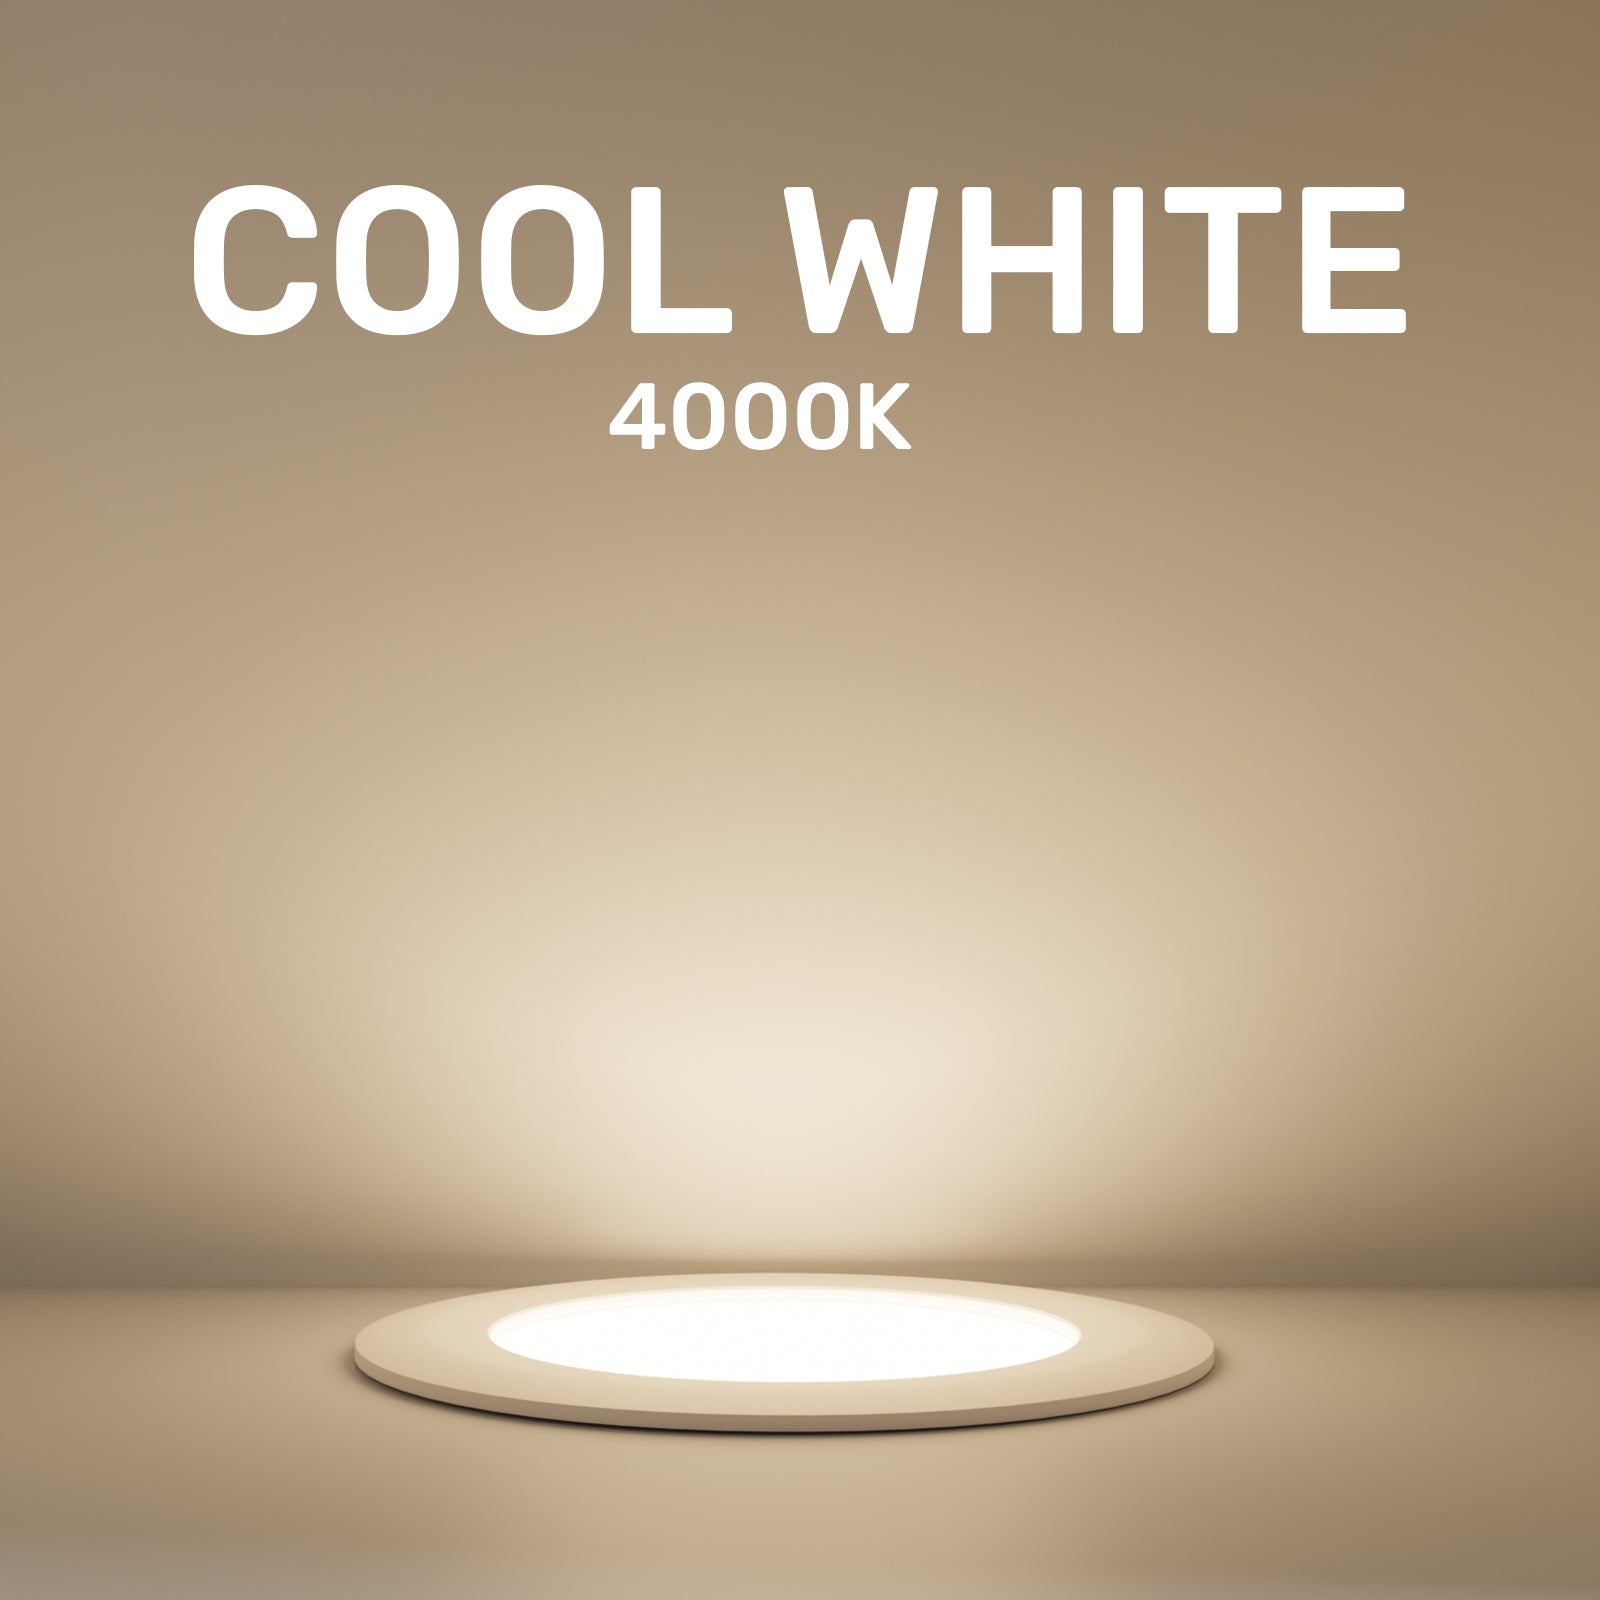 18W, LED Round Ceiling Downlights, 1980 Lumens, 4000K Cool White, Non-Dimmable Panel Spotlights